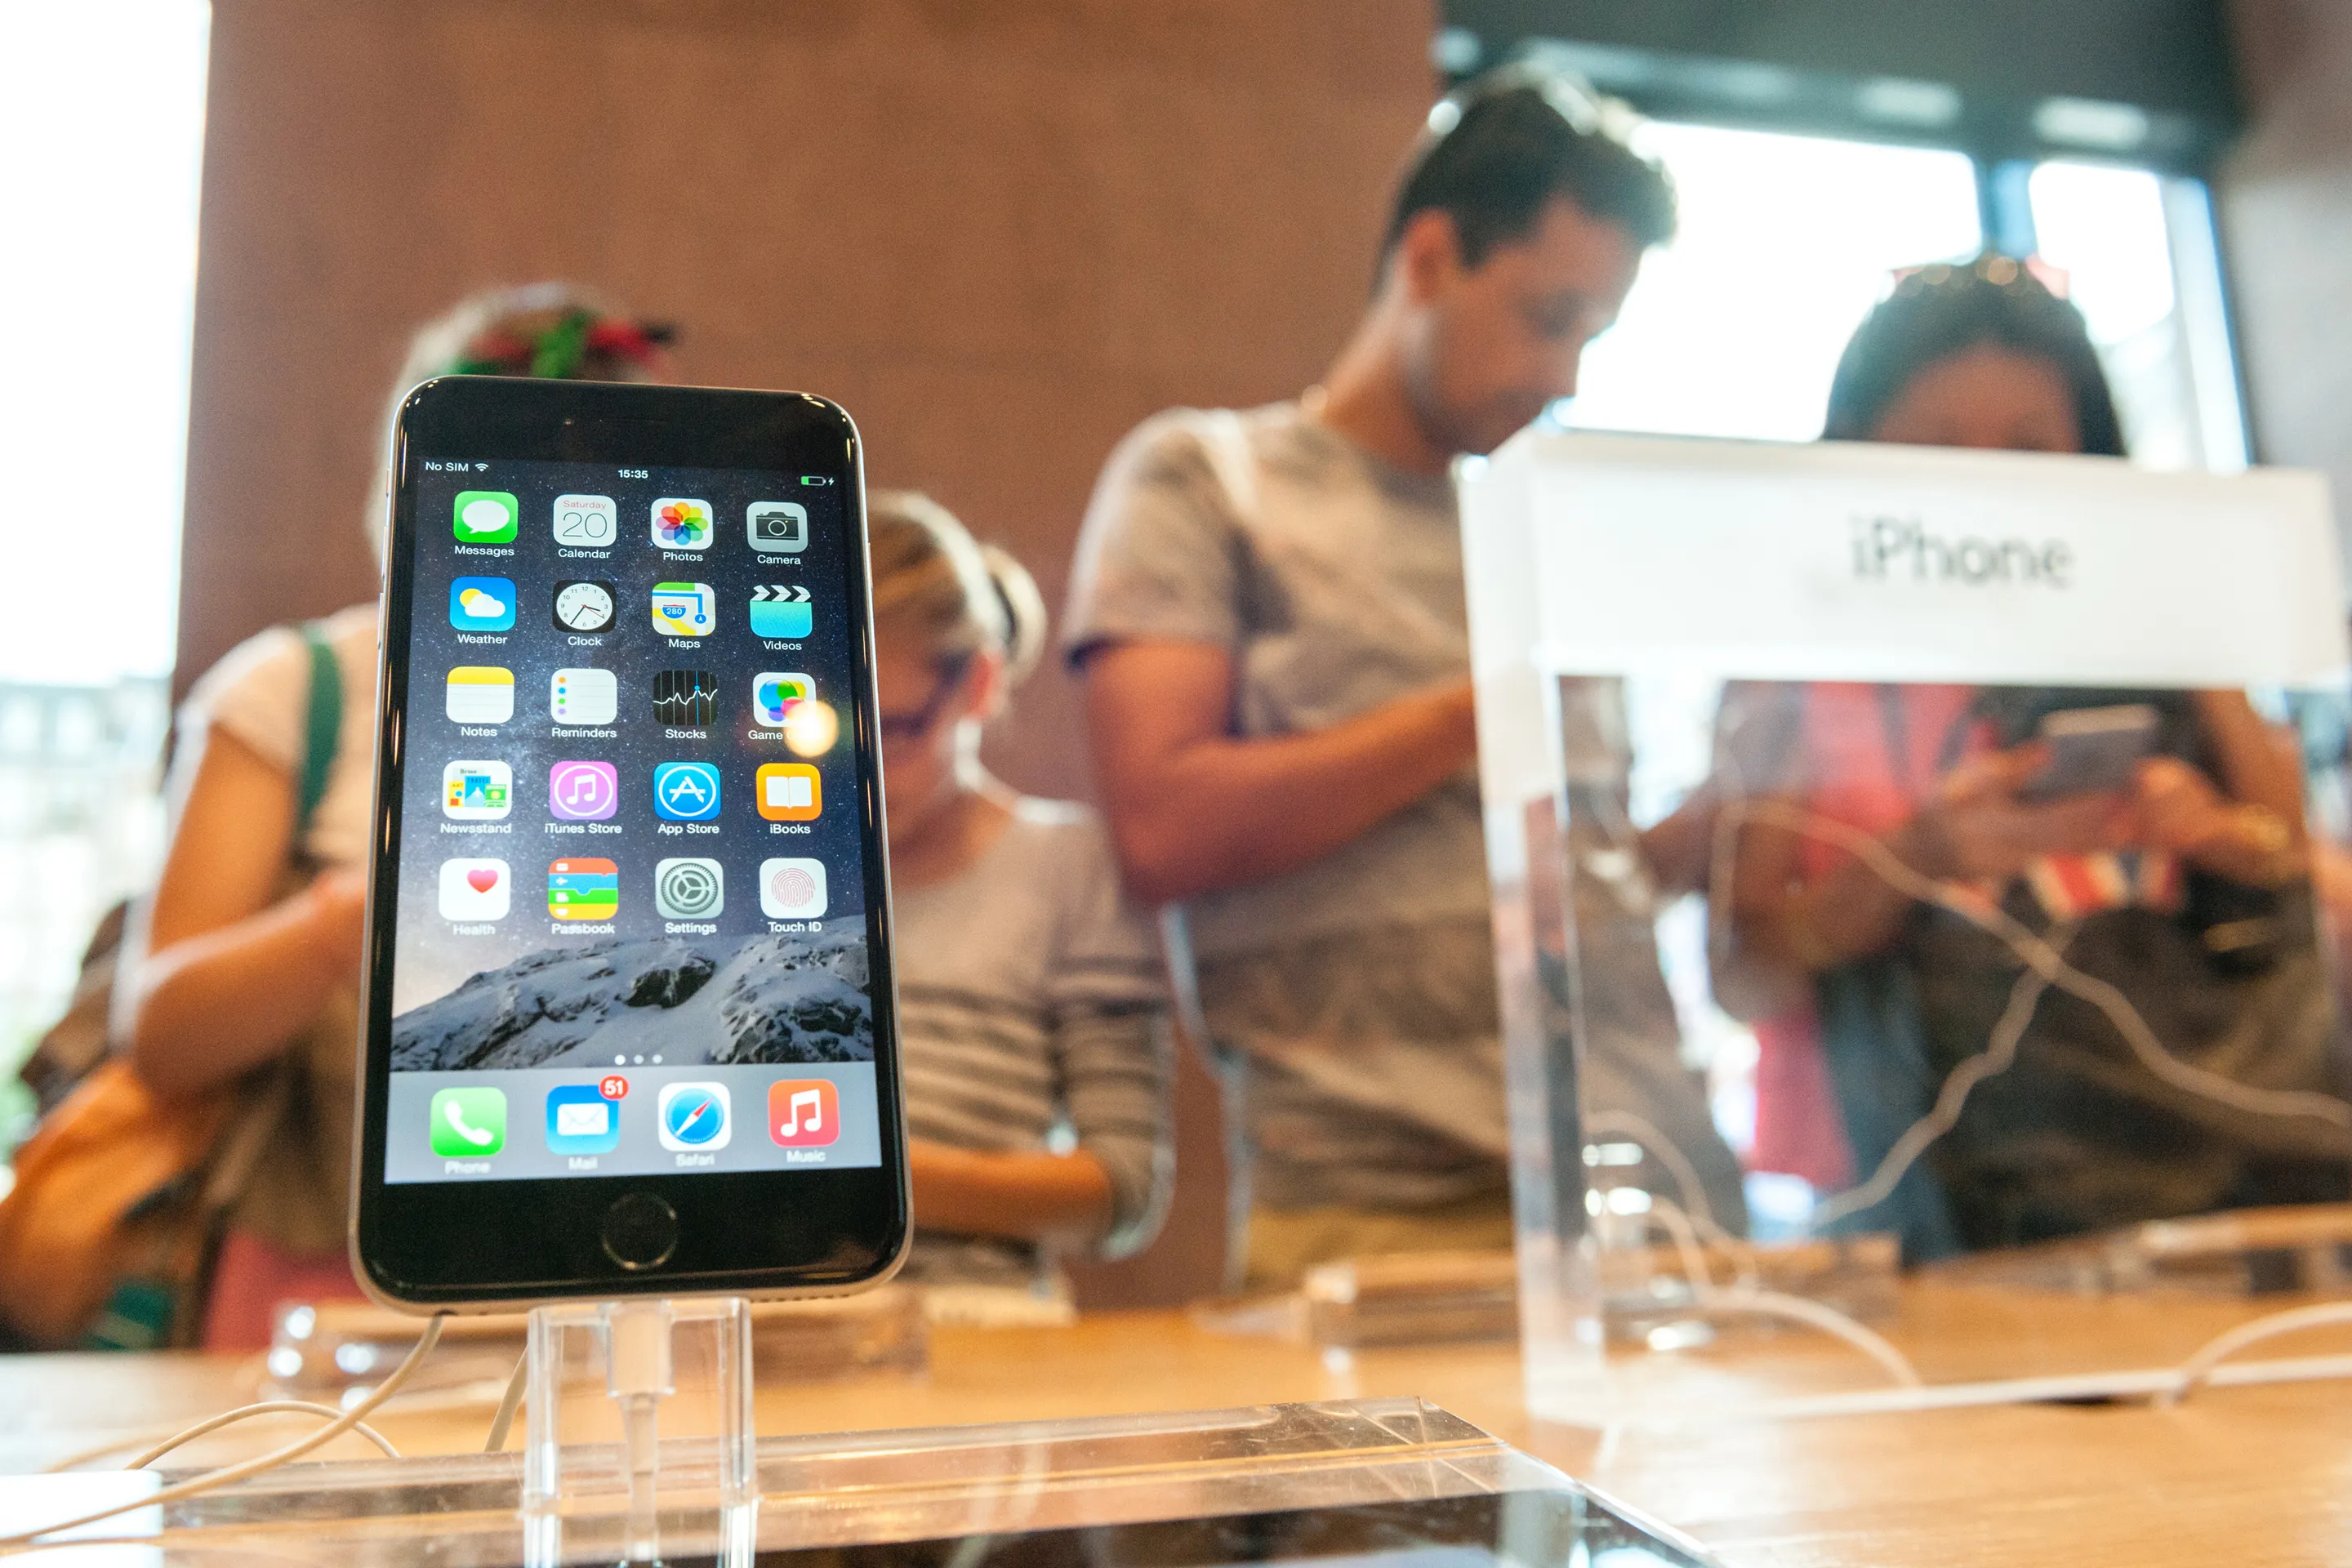 You Can Save a Ton of Money Buying a Refurbished iPhone. But Finding the Best Deal Can Be Tricky